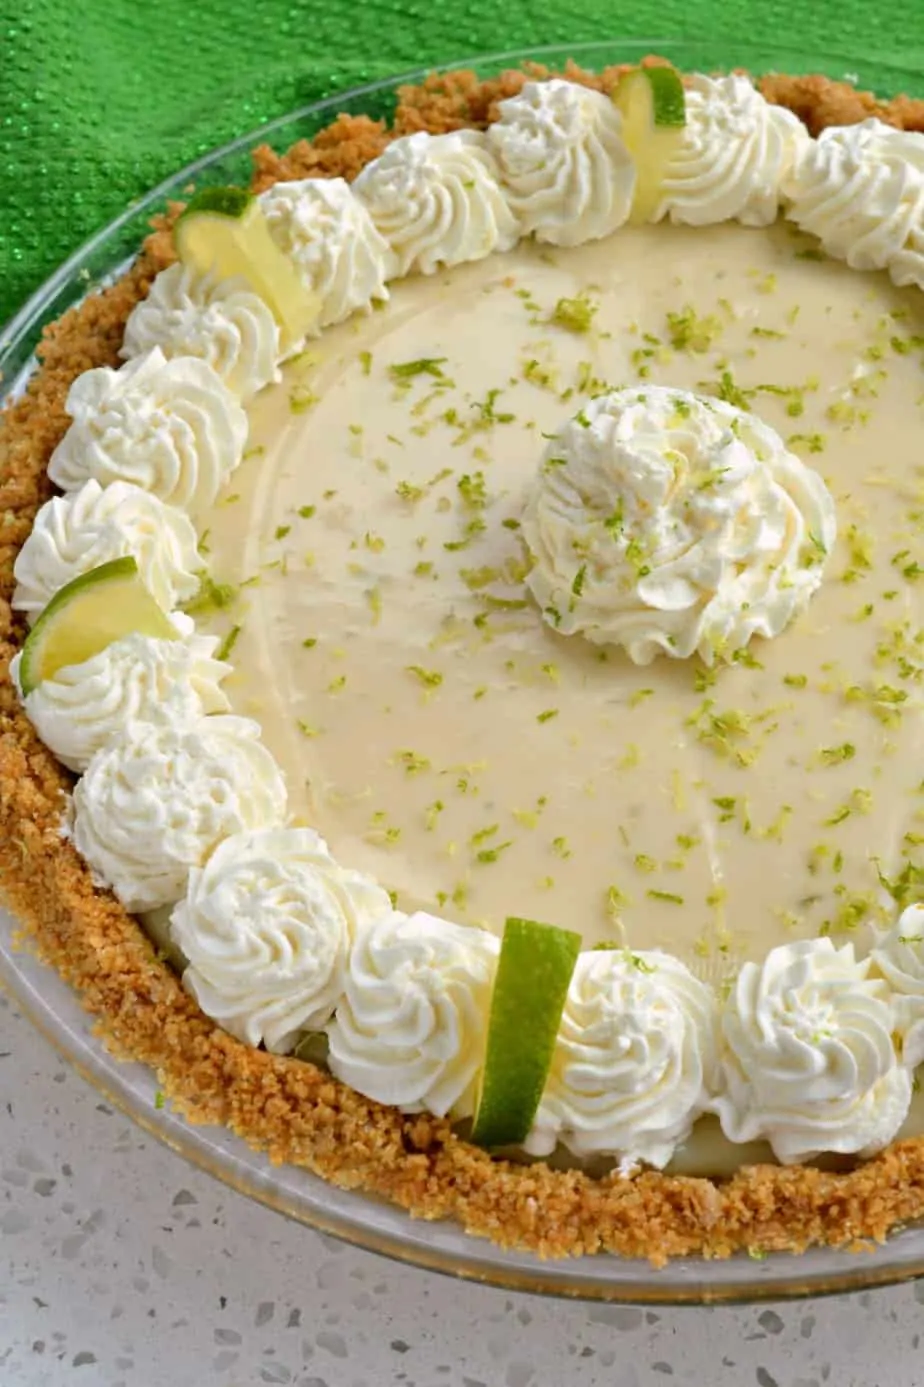 This easy key lime pie will quickly become a family favorite for birthdays, holidays and potlucks.